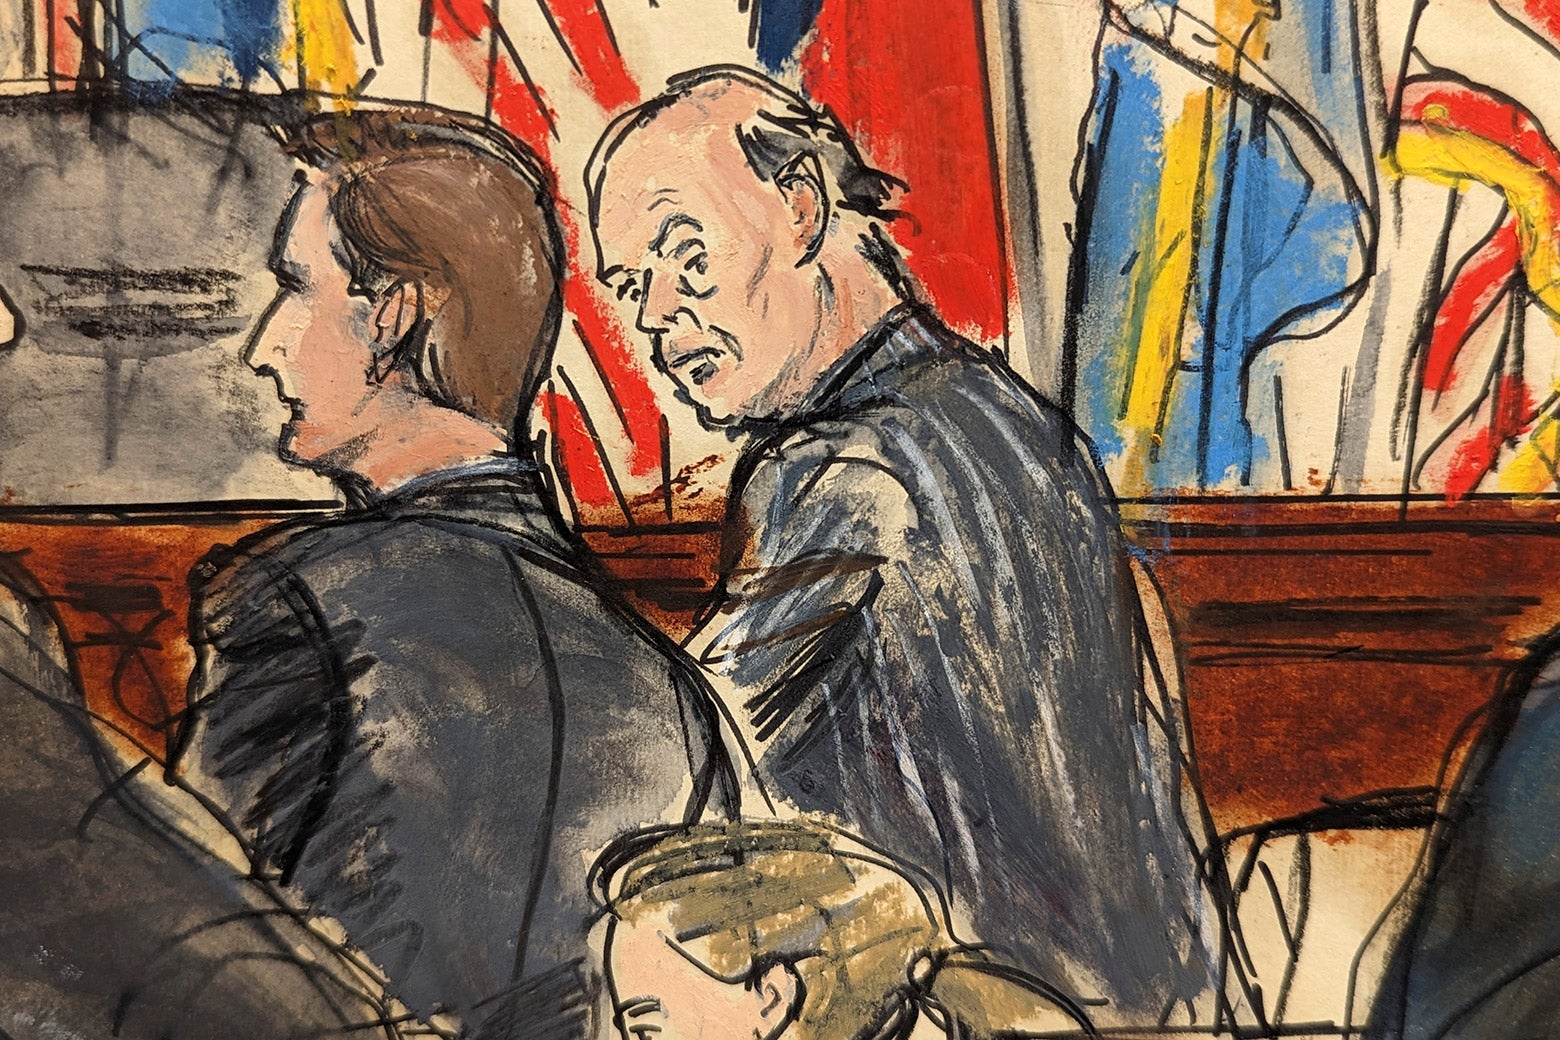 A courtroom sketch of two attorneys, from opposing sides, conferring.